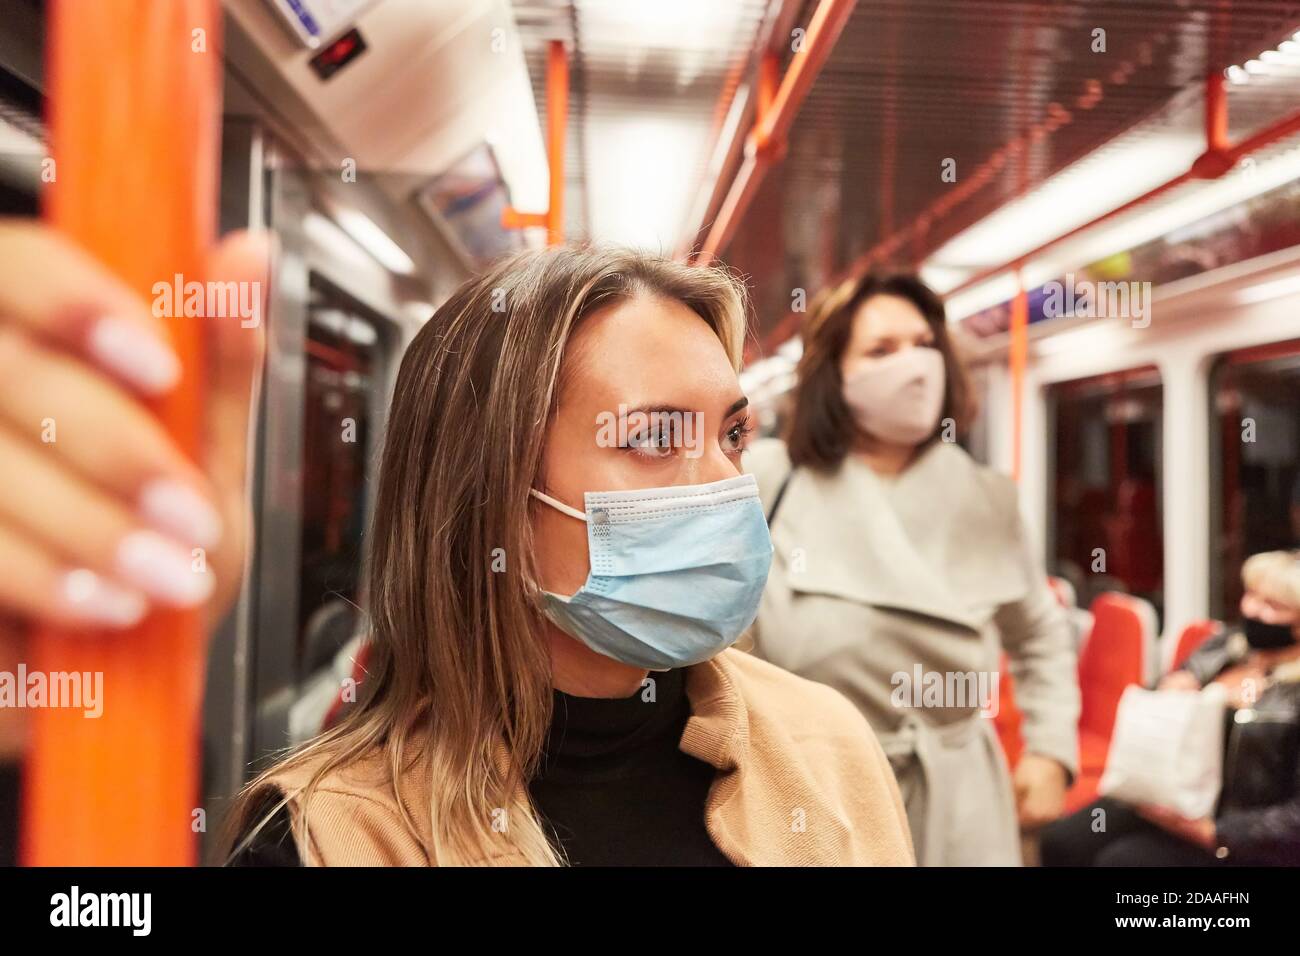 Mask requirement for passengers in local public transport due to Covid-19 pandemic Stock Photo